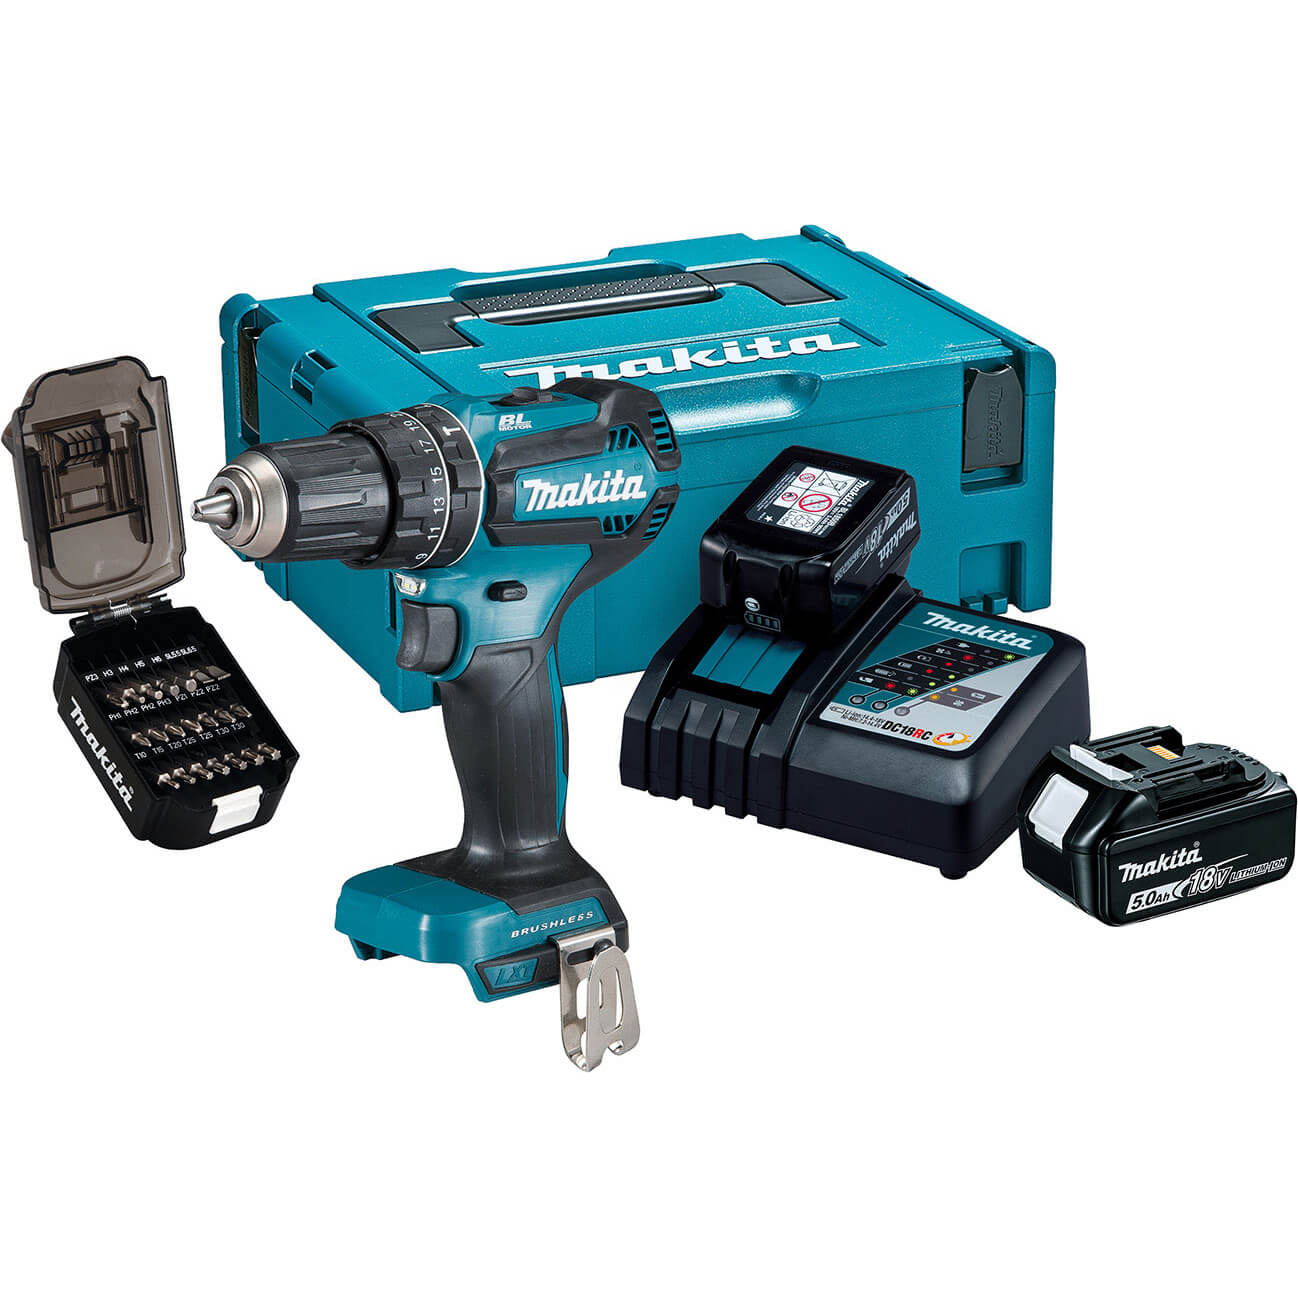 Image of Makita DHP485 18v LXT Cordless Brushless Combi Drill 2 x 5ah Li-ion Charger Case & Accessories